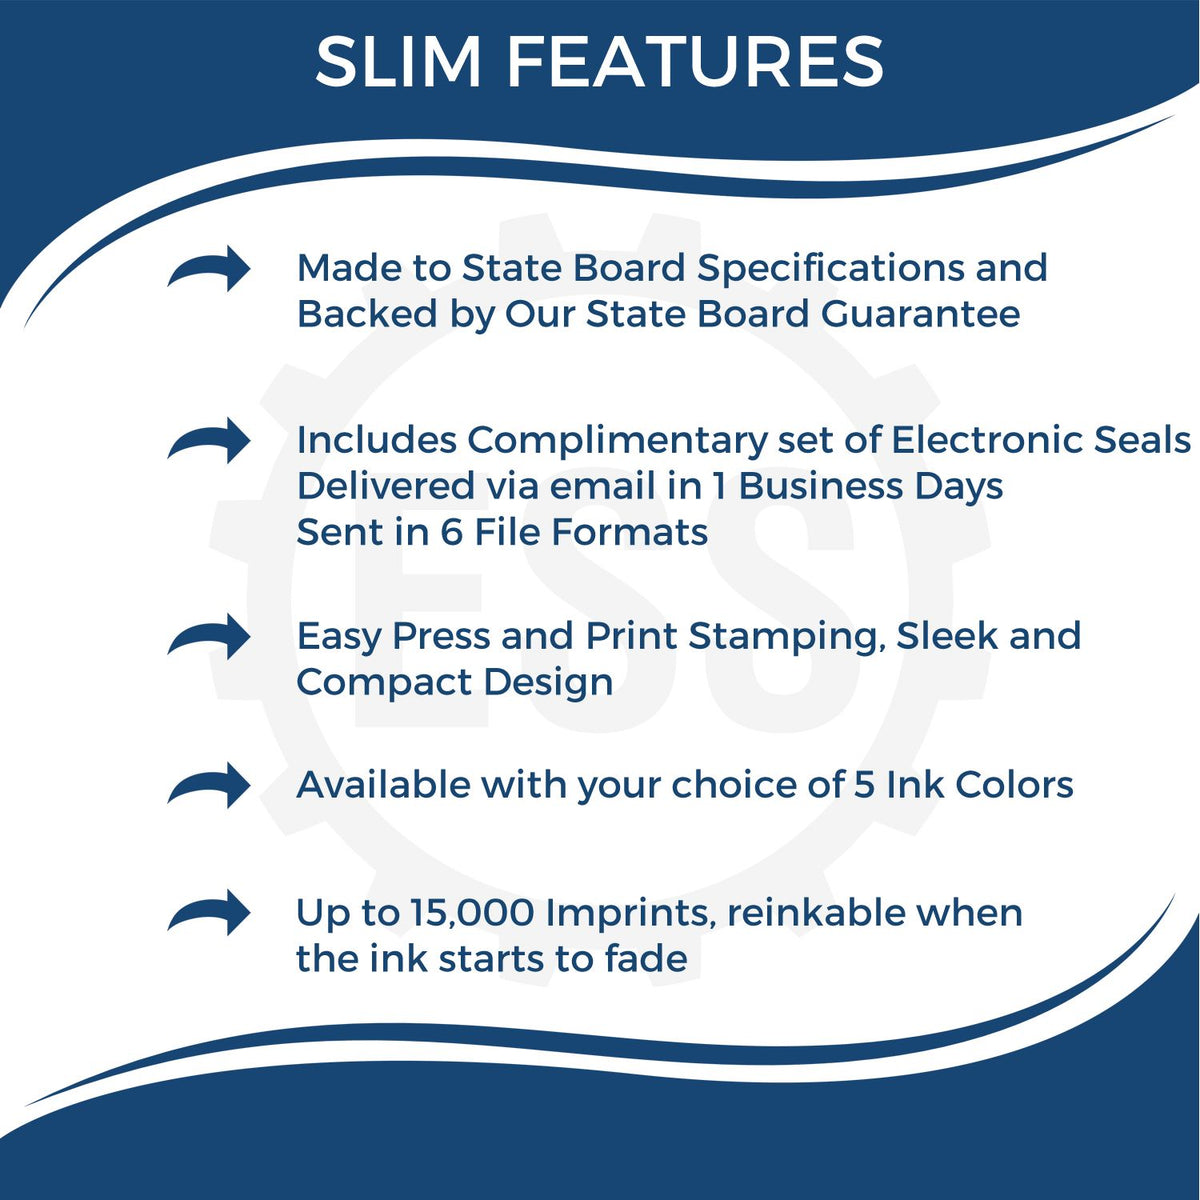 A picture of an infographic highlighting the selling points for the Slim Pre-Inked South Carolina Professional Engineer Seal Stamp